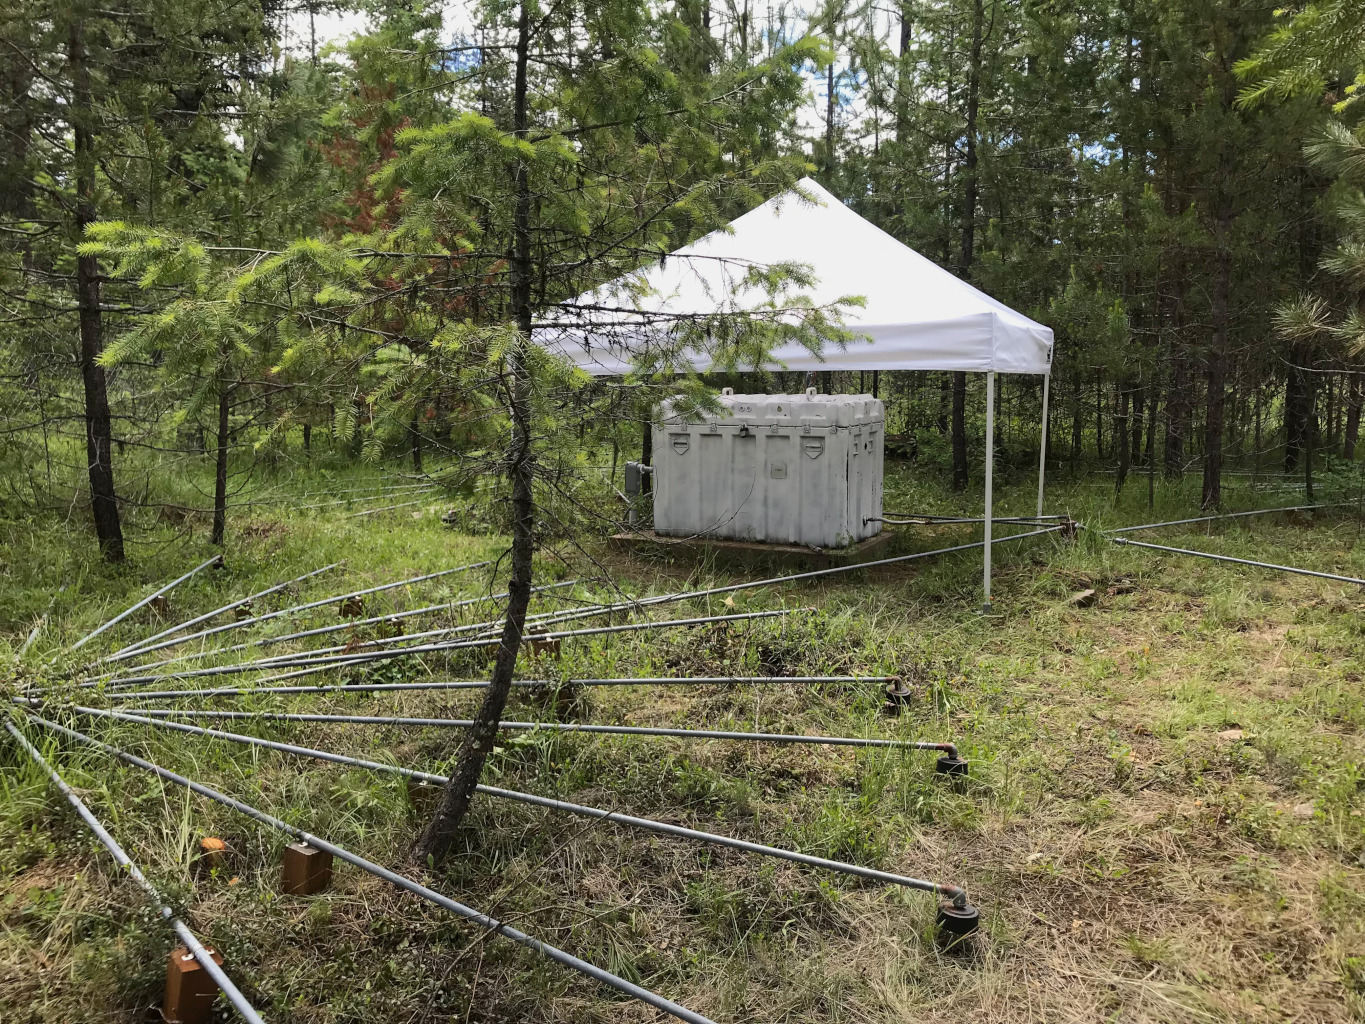 Big white box beneath white popup tent with array in front. Thin trees surrounding everything.